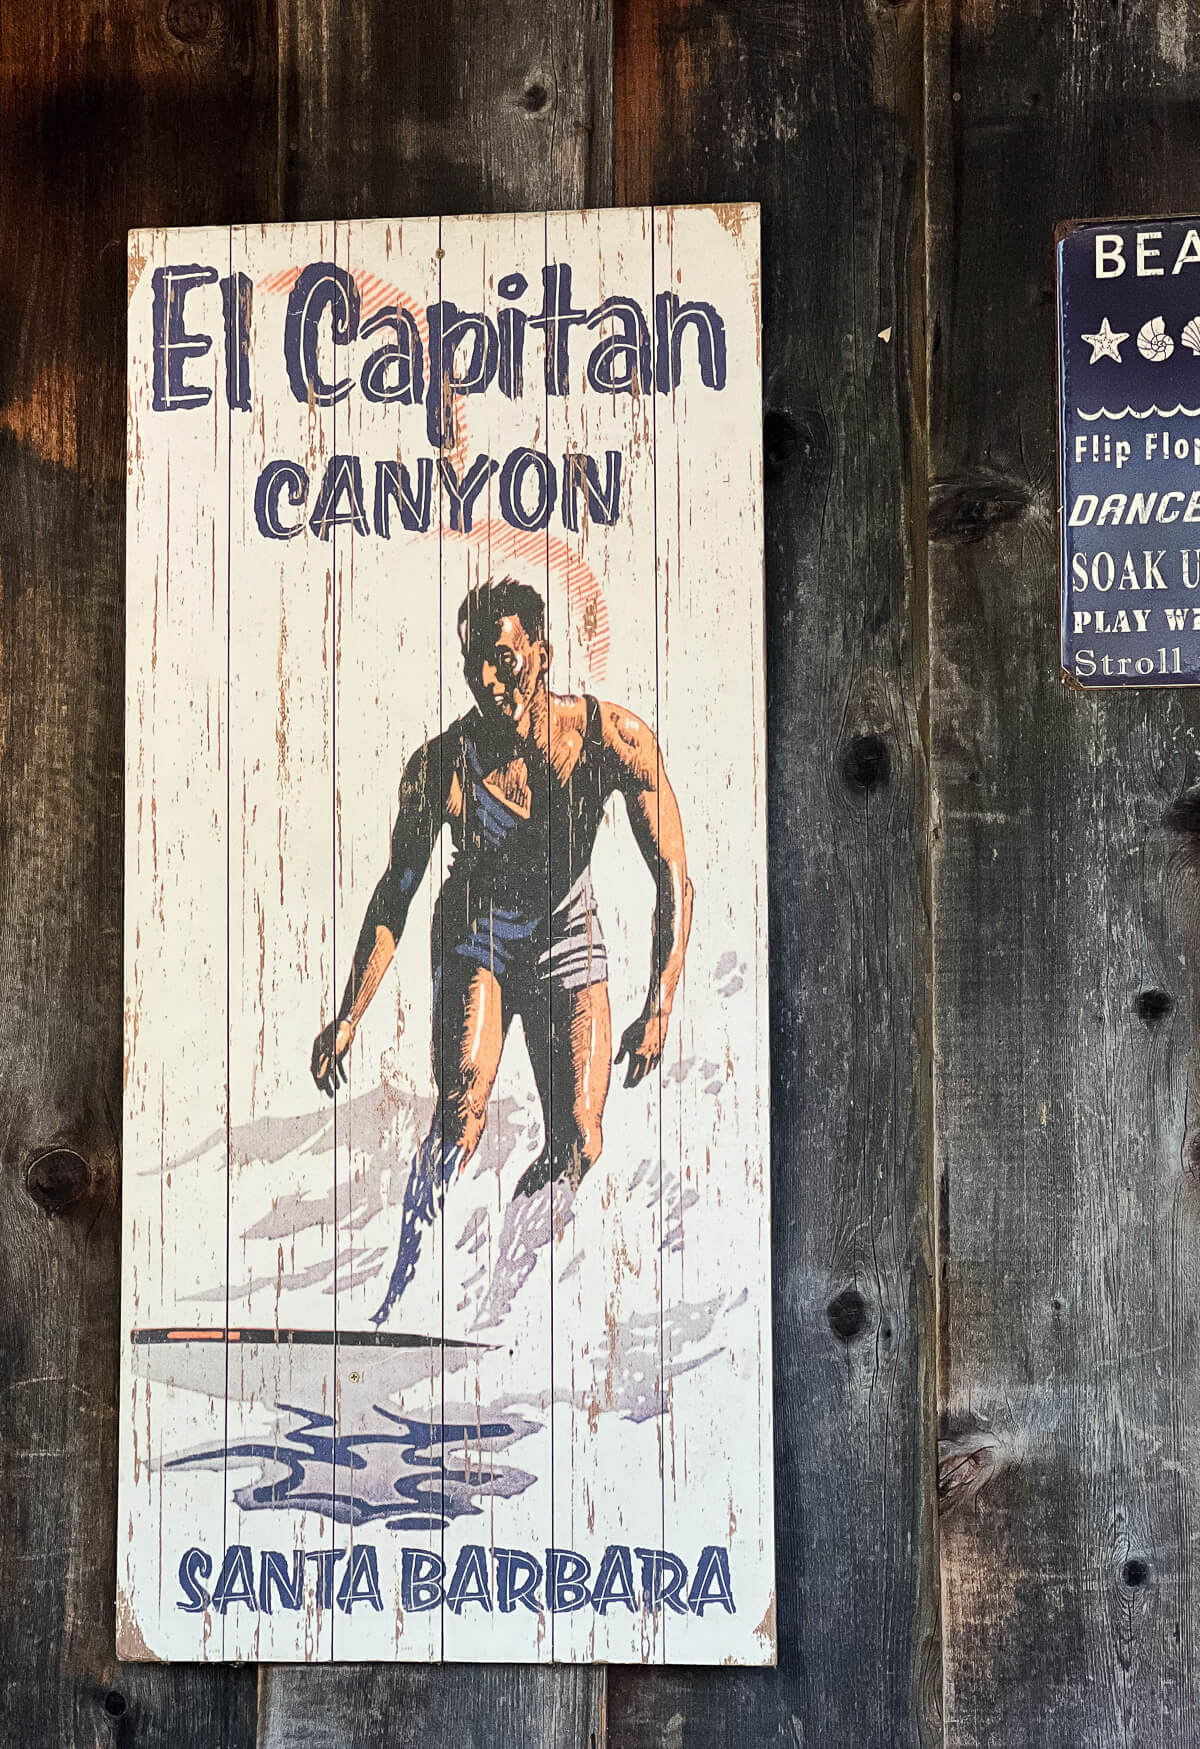 A vintage-inspired wooden sign with a painting of a surfer and text that reads "El Capitan canyon Santa Barbara" 